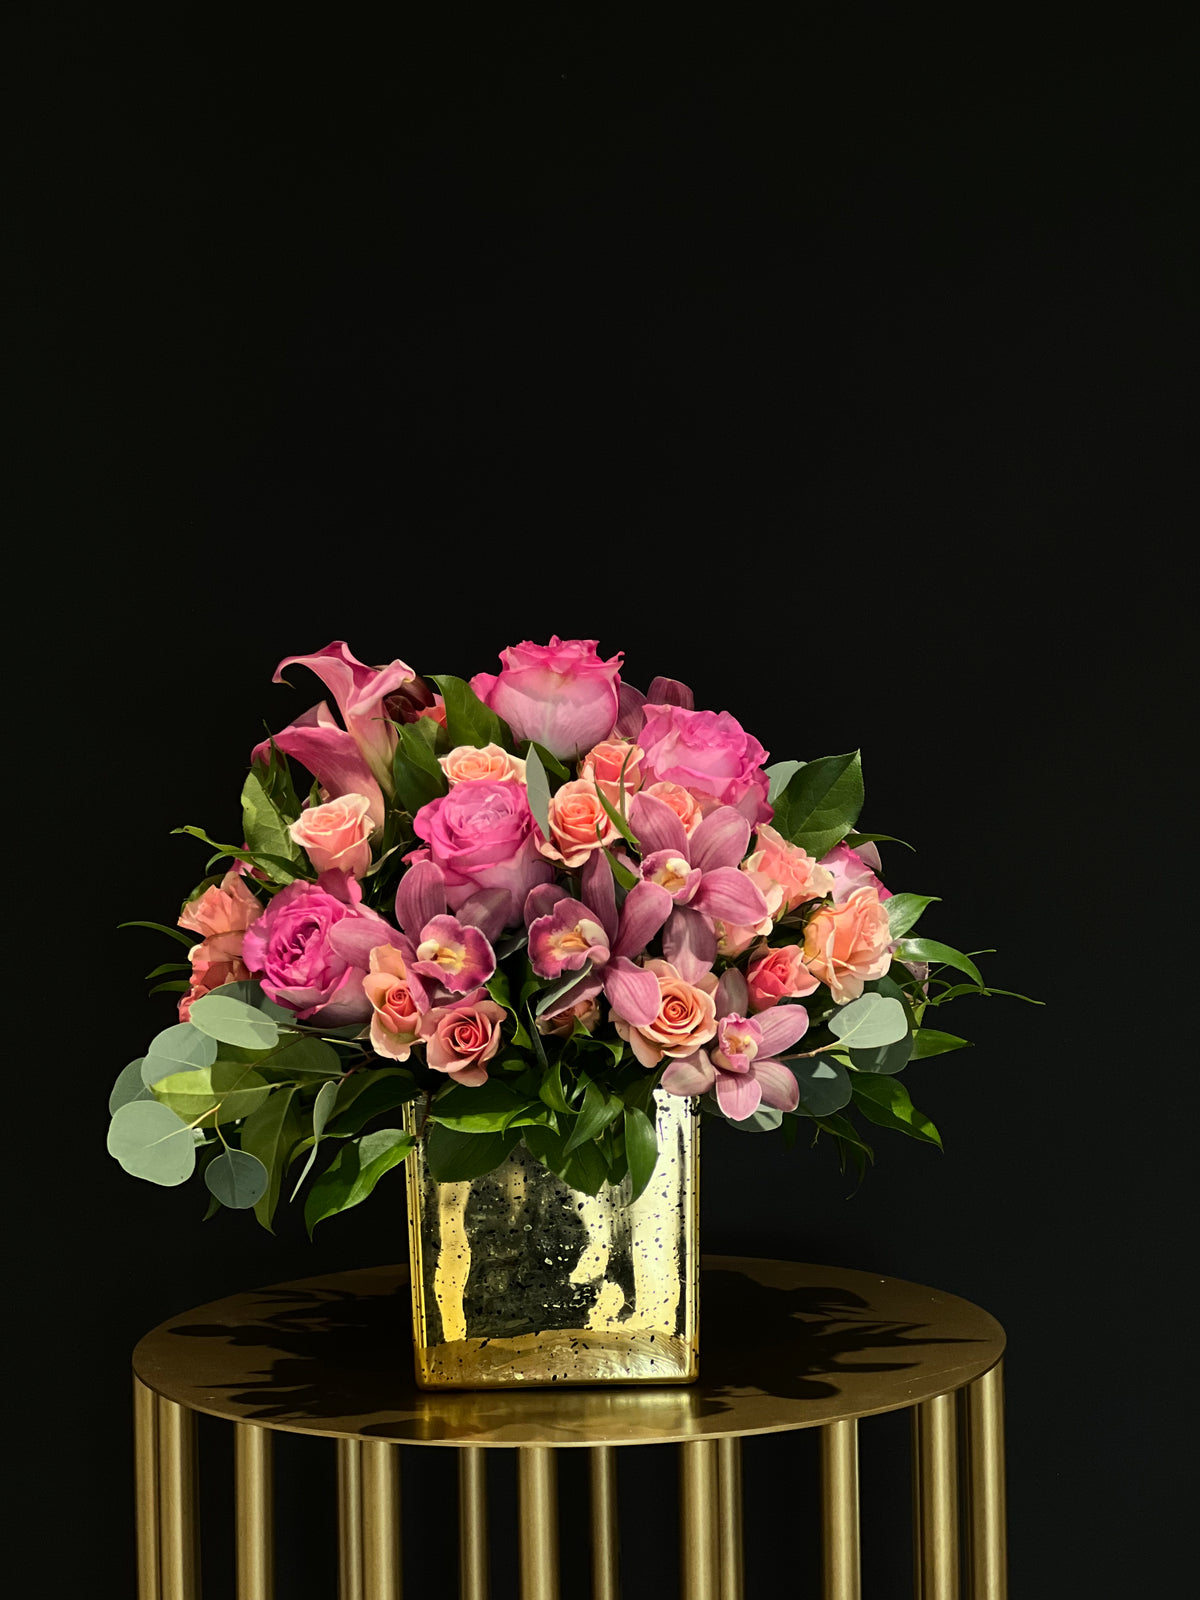 "Sweet Pink and Lavender Bloom Bouquet: Elegant Roses, Spray Roses, and Mini Calla Lilies in a Glass Vase – Perfect for Anniversaries, Congratulations, or Birthdays. Flower Delivery in GTA by Yonge Florist."